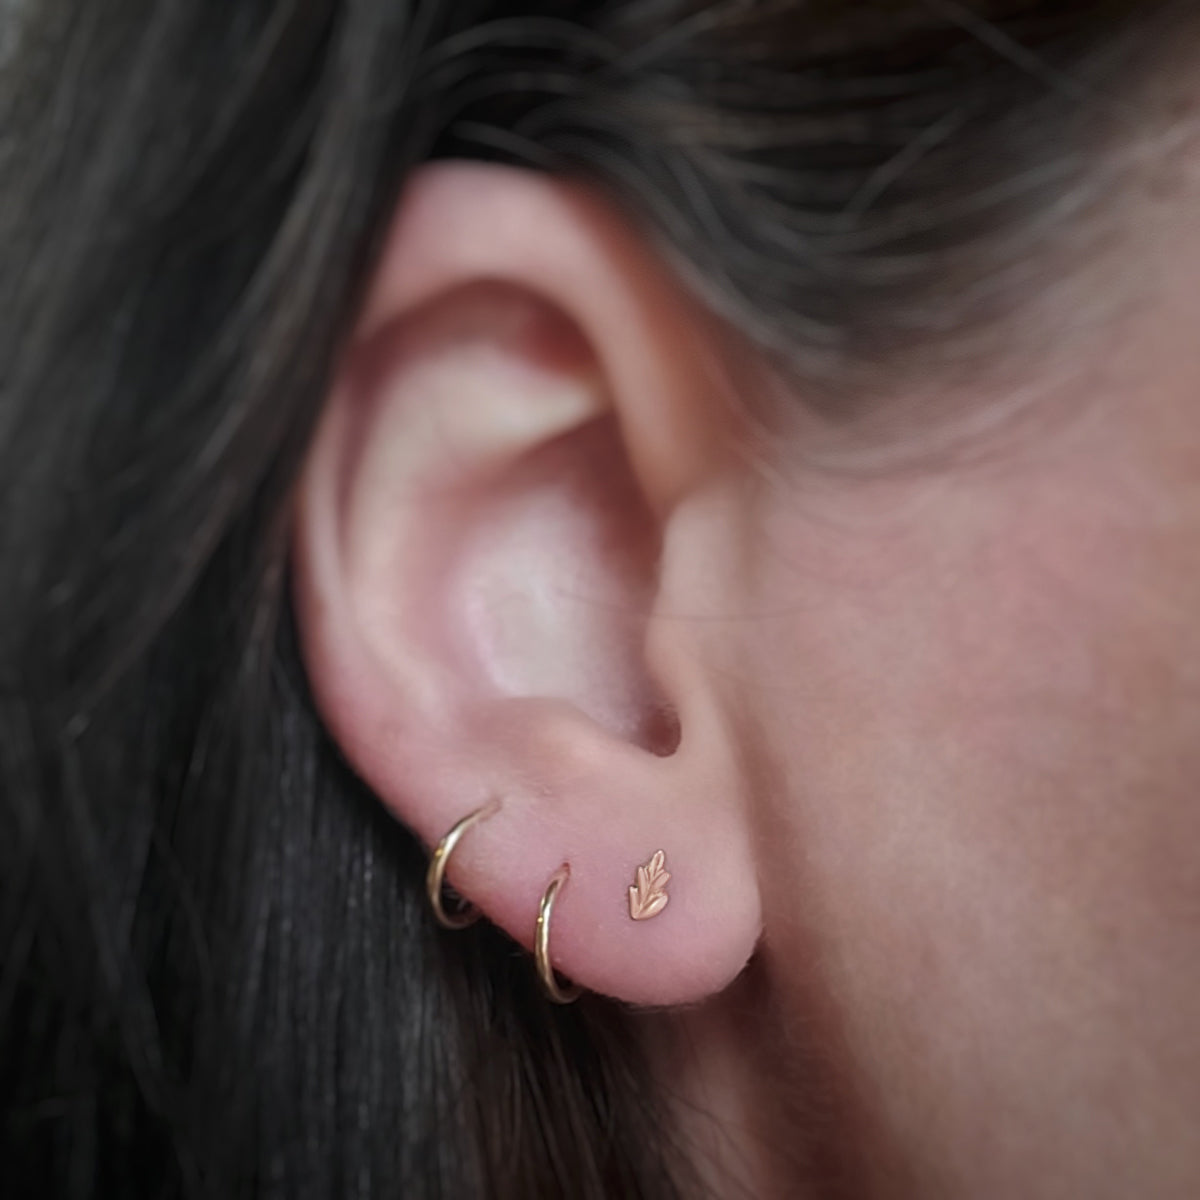 Handmade everyday stud earrings with hand carved botanical Wood Nymph details in 18K rose gold by Designer Megan Thorne